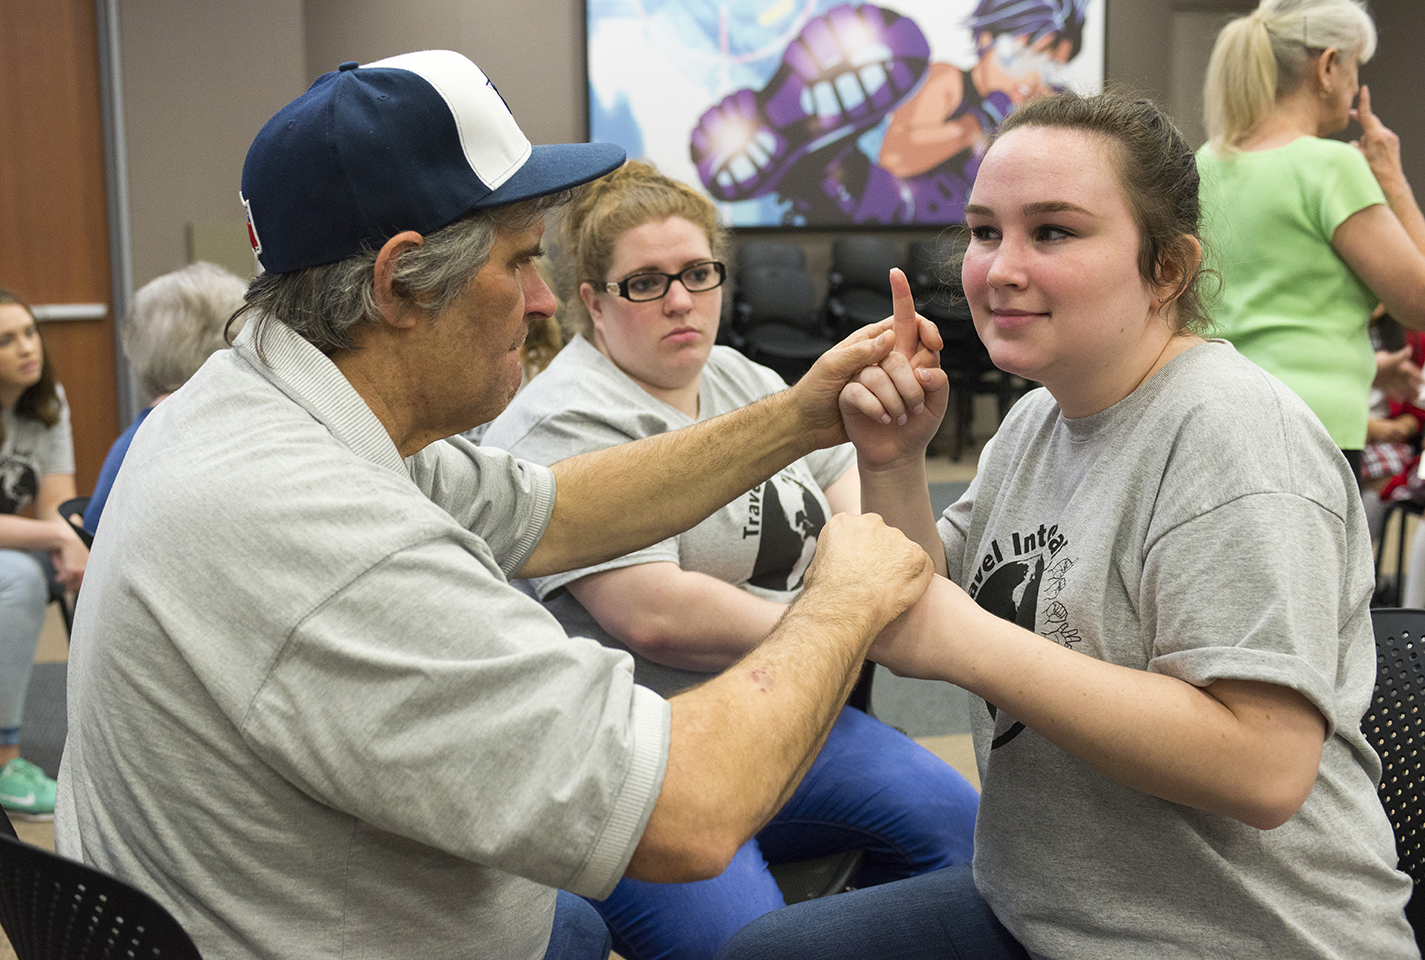 TR student Delaney Toone uses her hands to communicate with Glynn Shrods, a deaf and blind man from Fort Worth who shared his story with Deaf, Deaf World attendees.